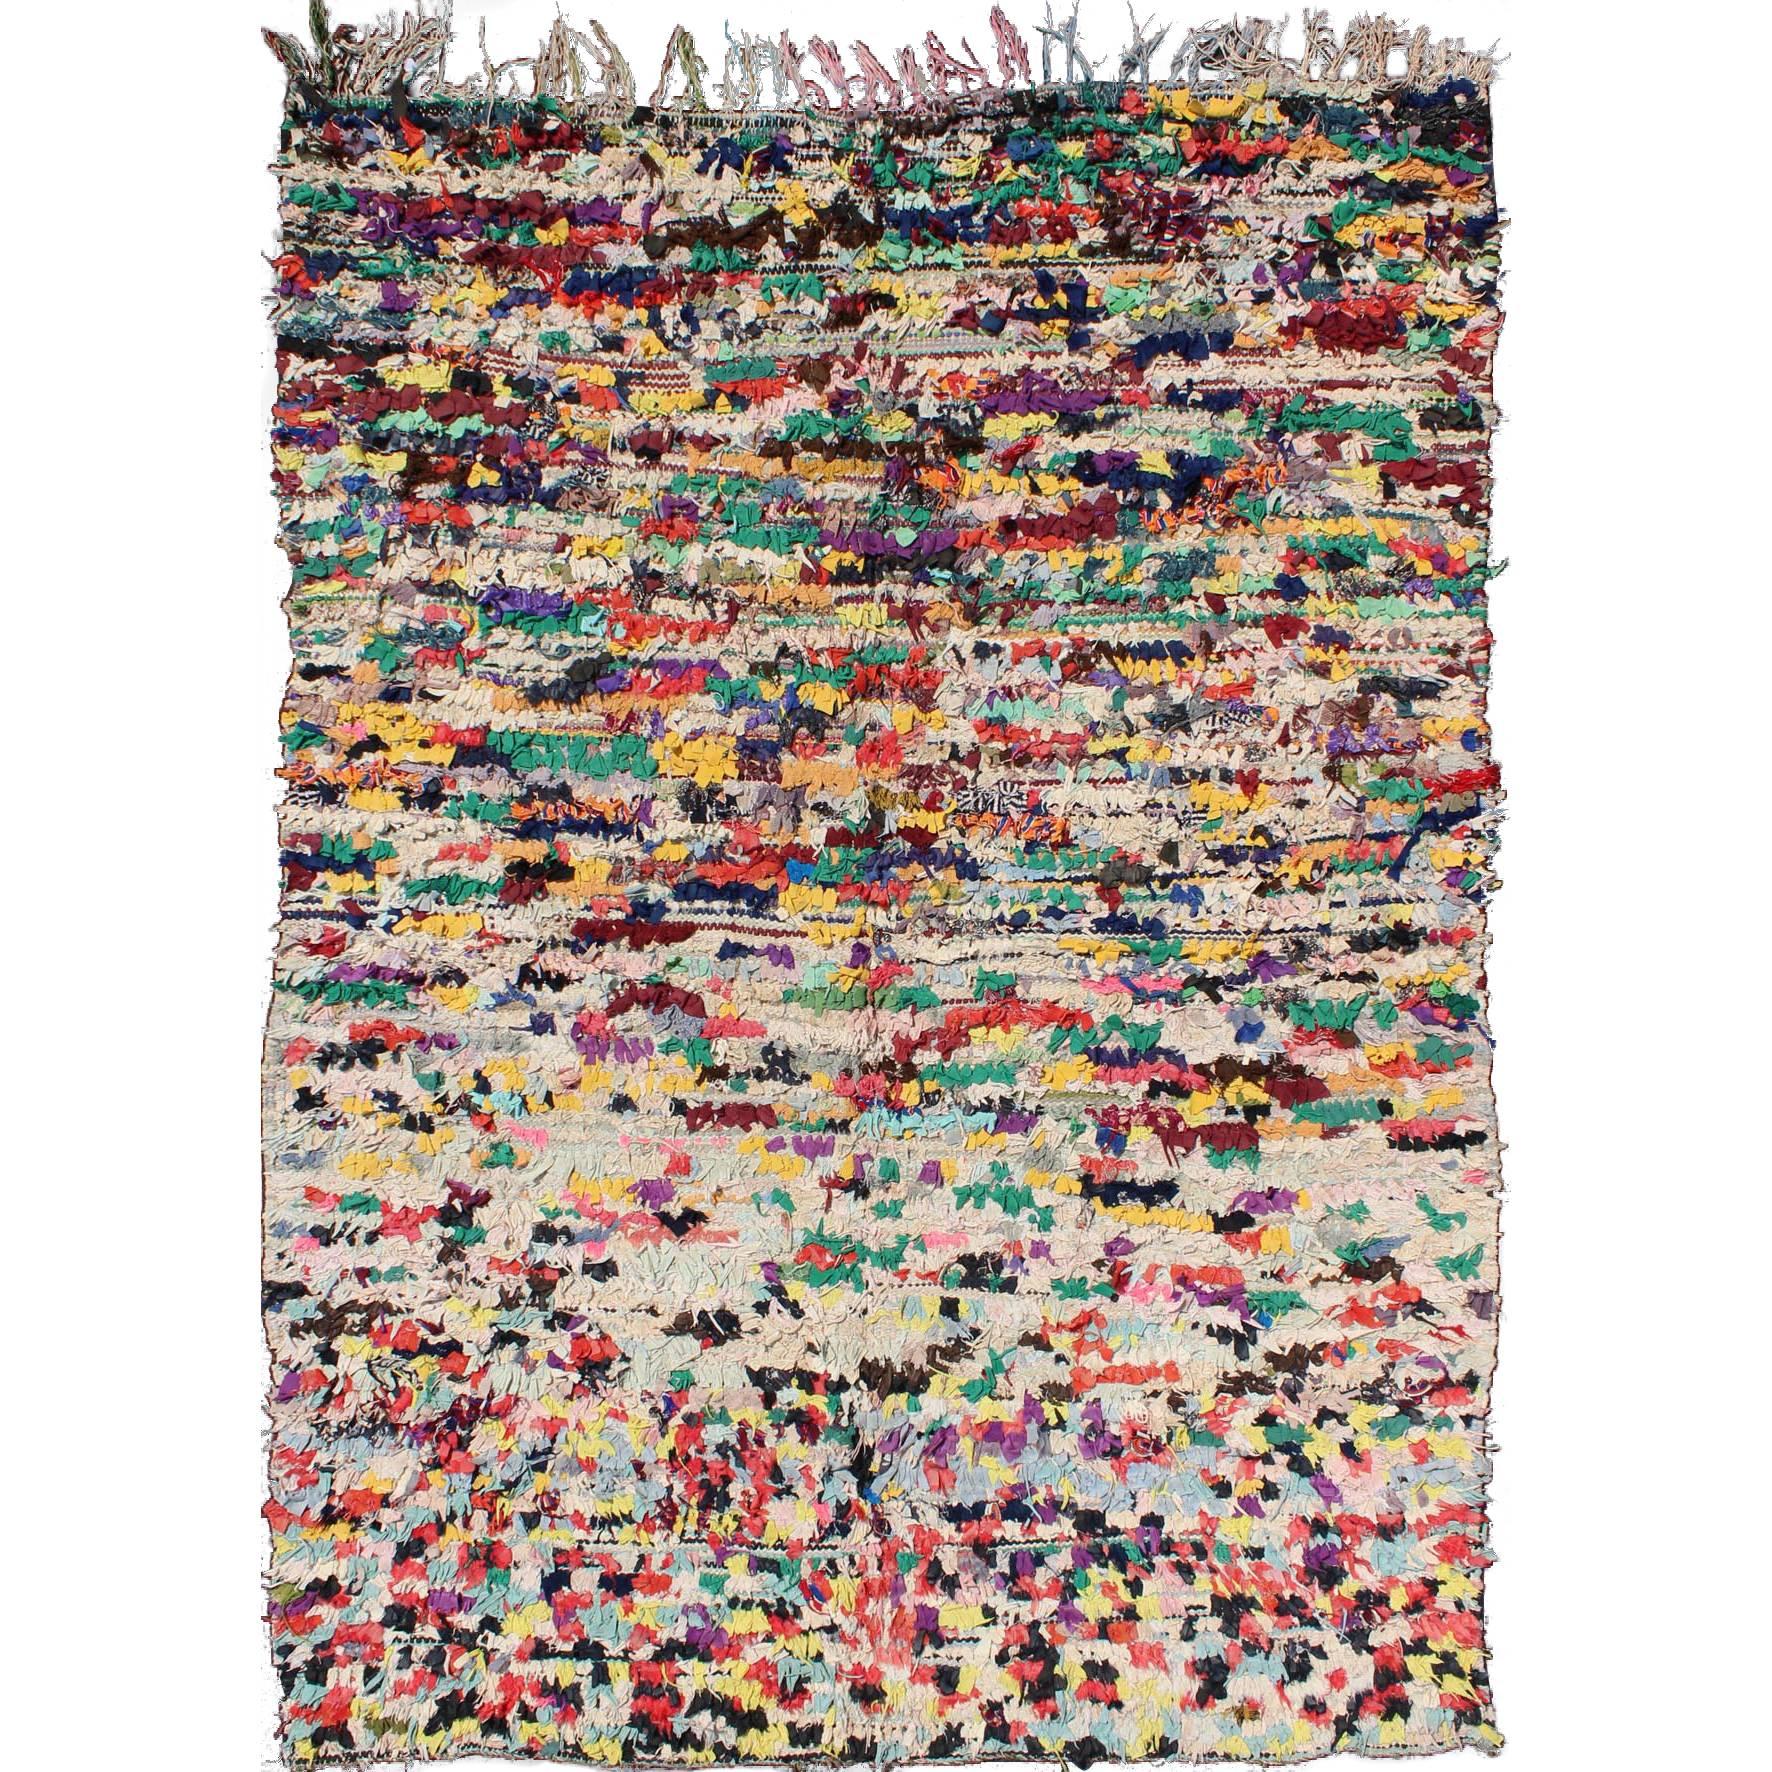 Vintage Moroccan Rag Rug with checkered Design in Multi Colors 